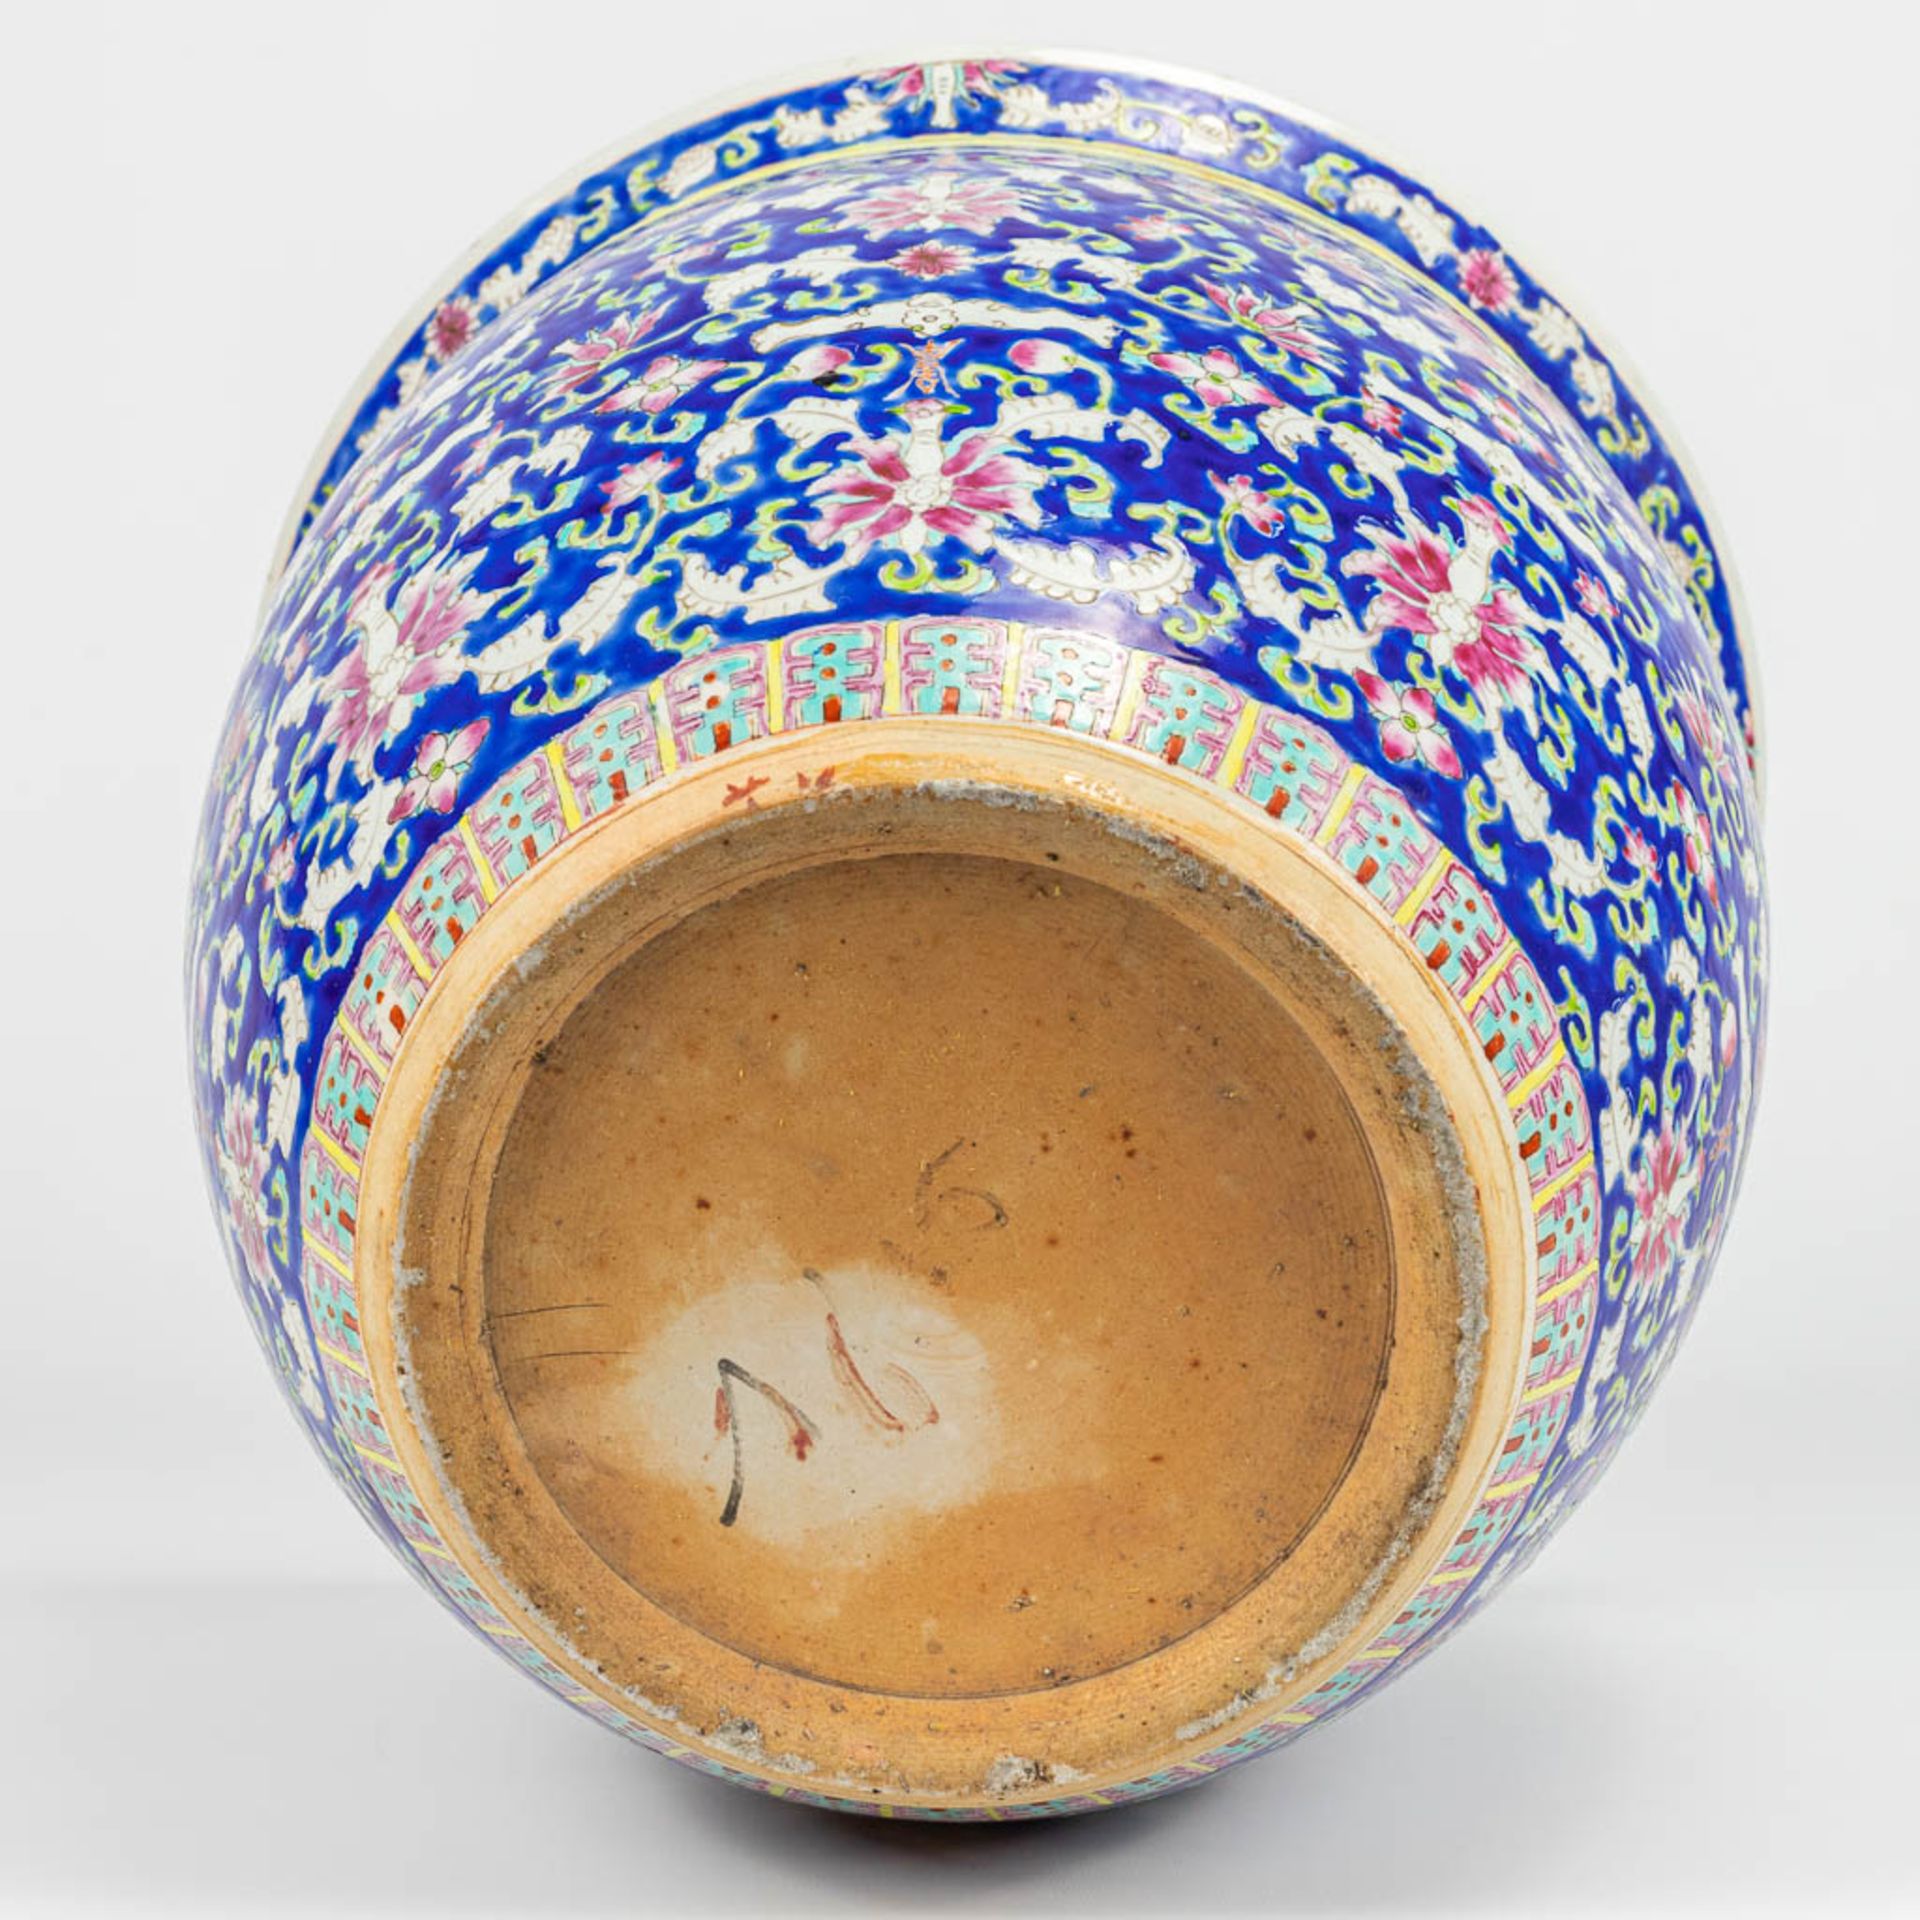 A large cache-pot made of Chinese porcelain and decorated with flowers - Image 6 of 10